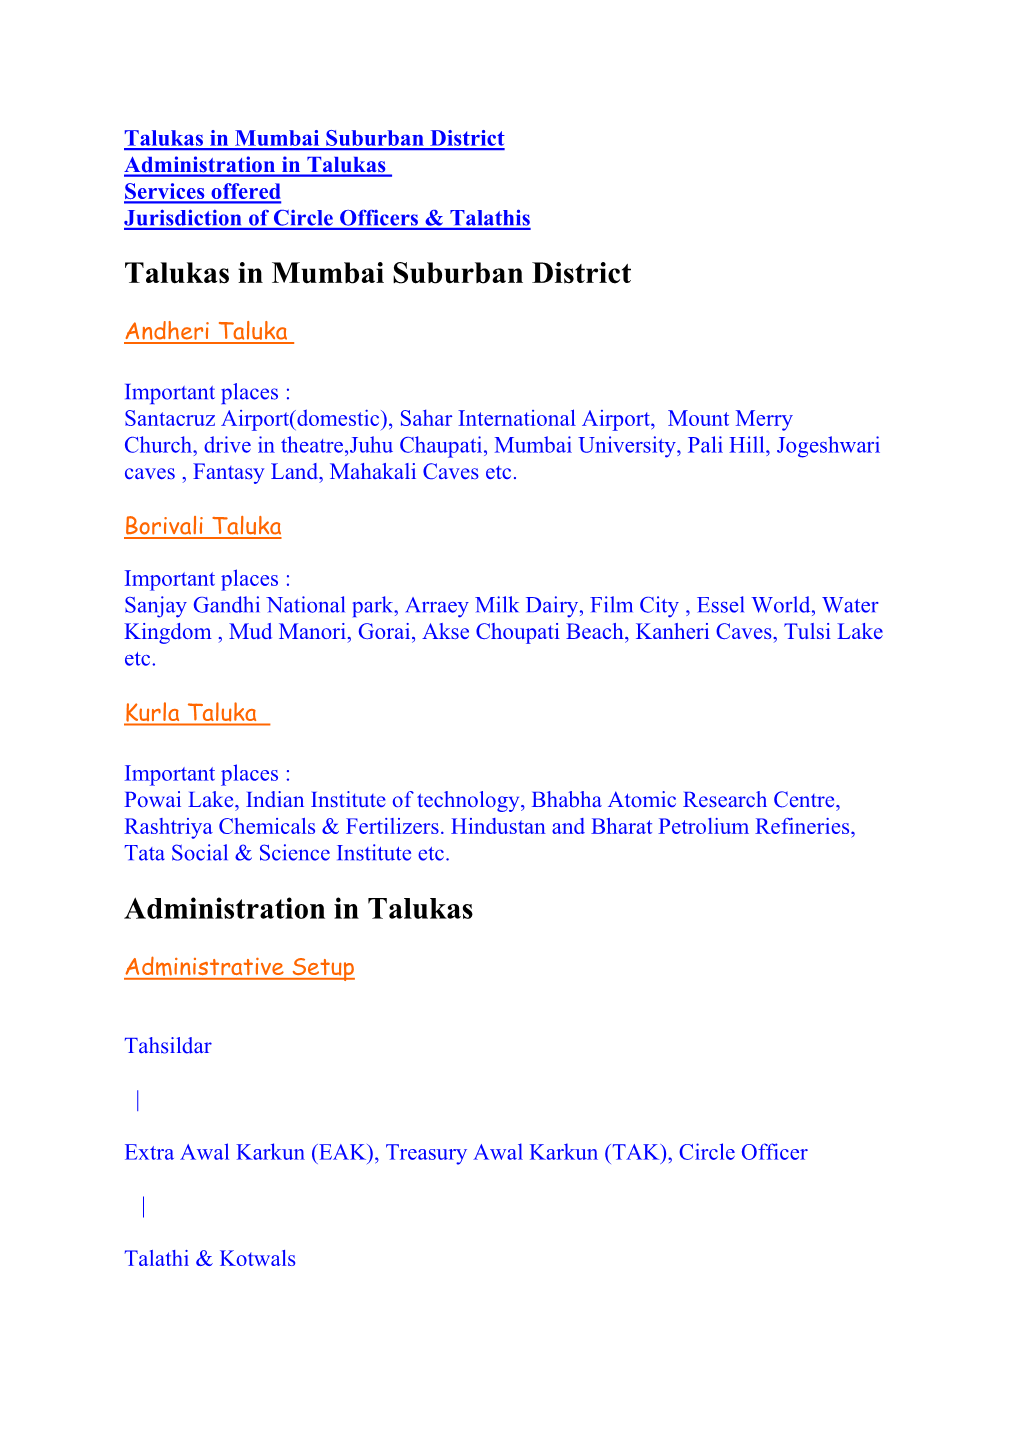 Talukas in Mumbai Suburban District Administration in Talukas Services Offered Jurisdiction of Circle Officers & Talathis Talukas in Mumbai Suburban District